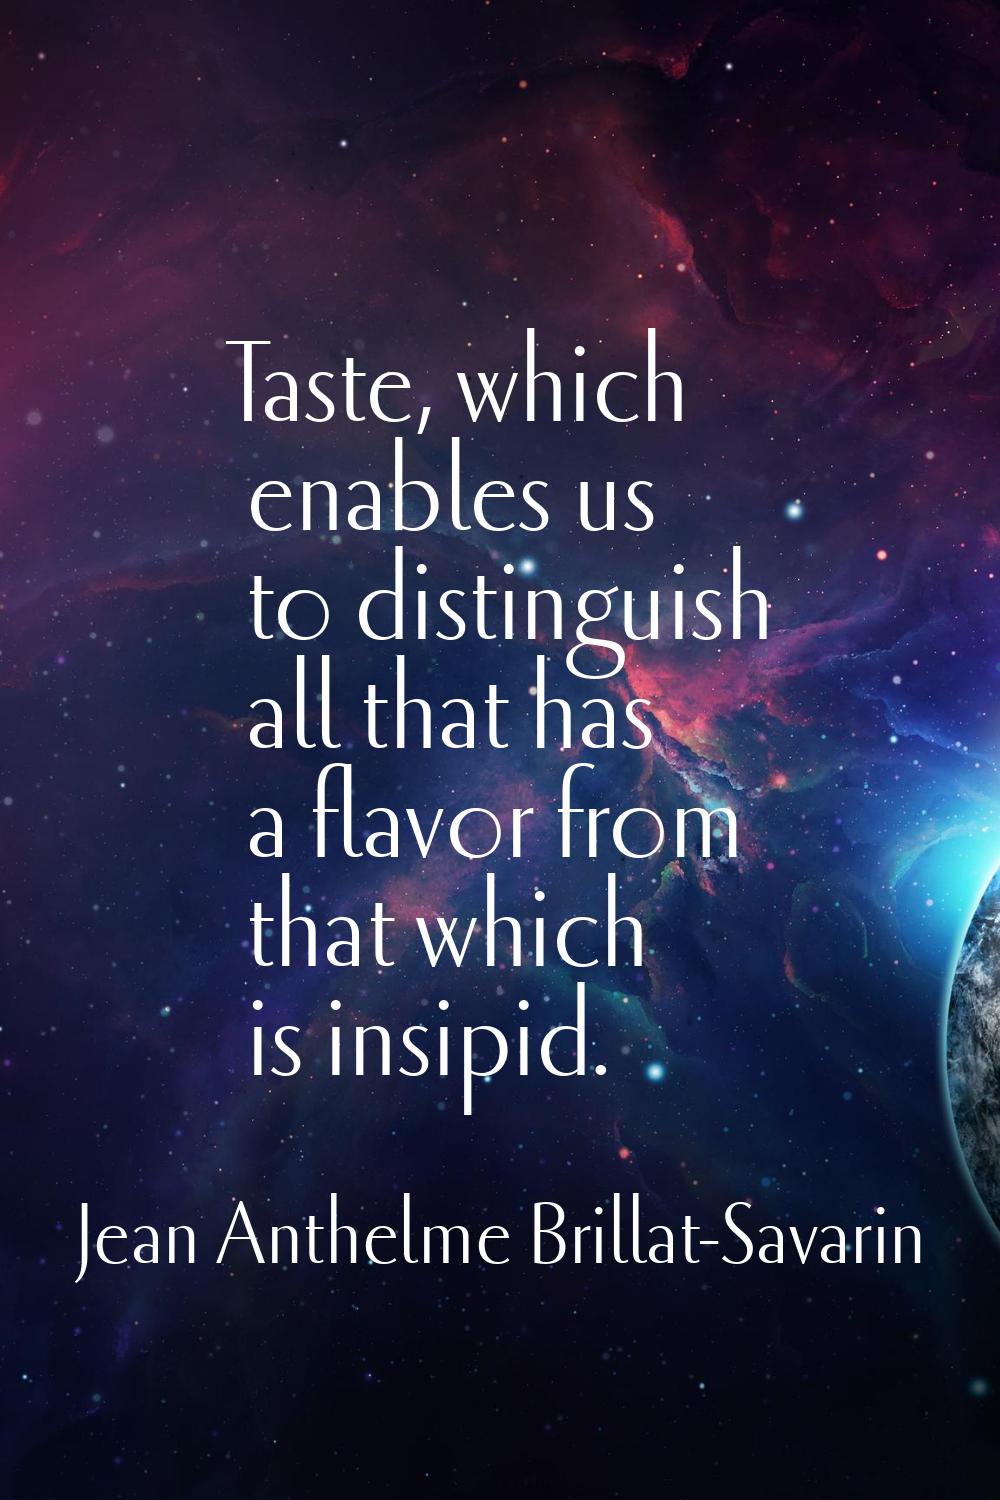 Taste, which enables us to distinguish all that has a flavor from that which is insipid.